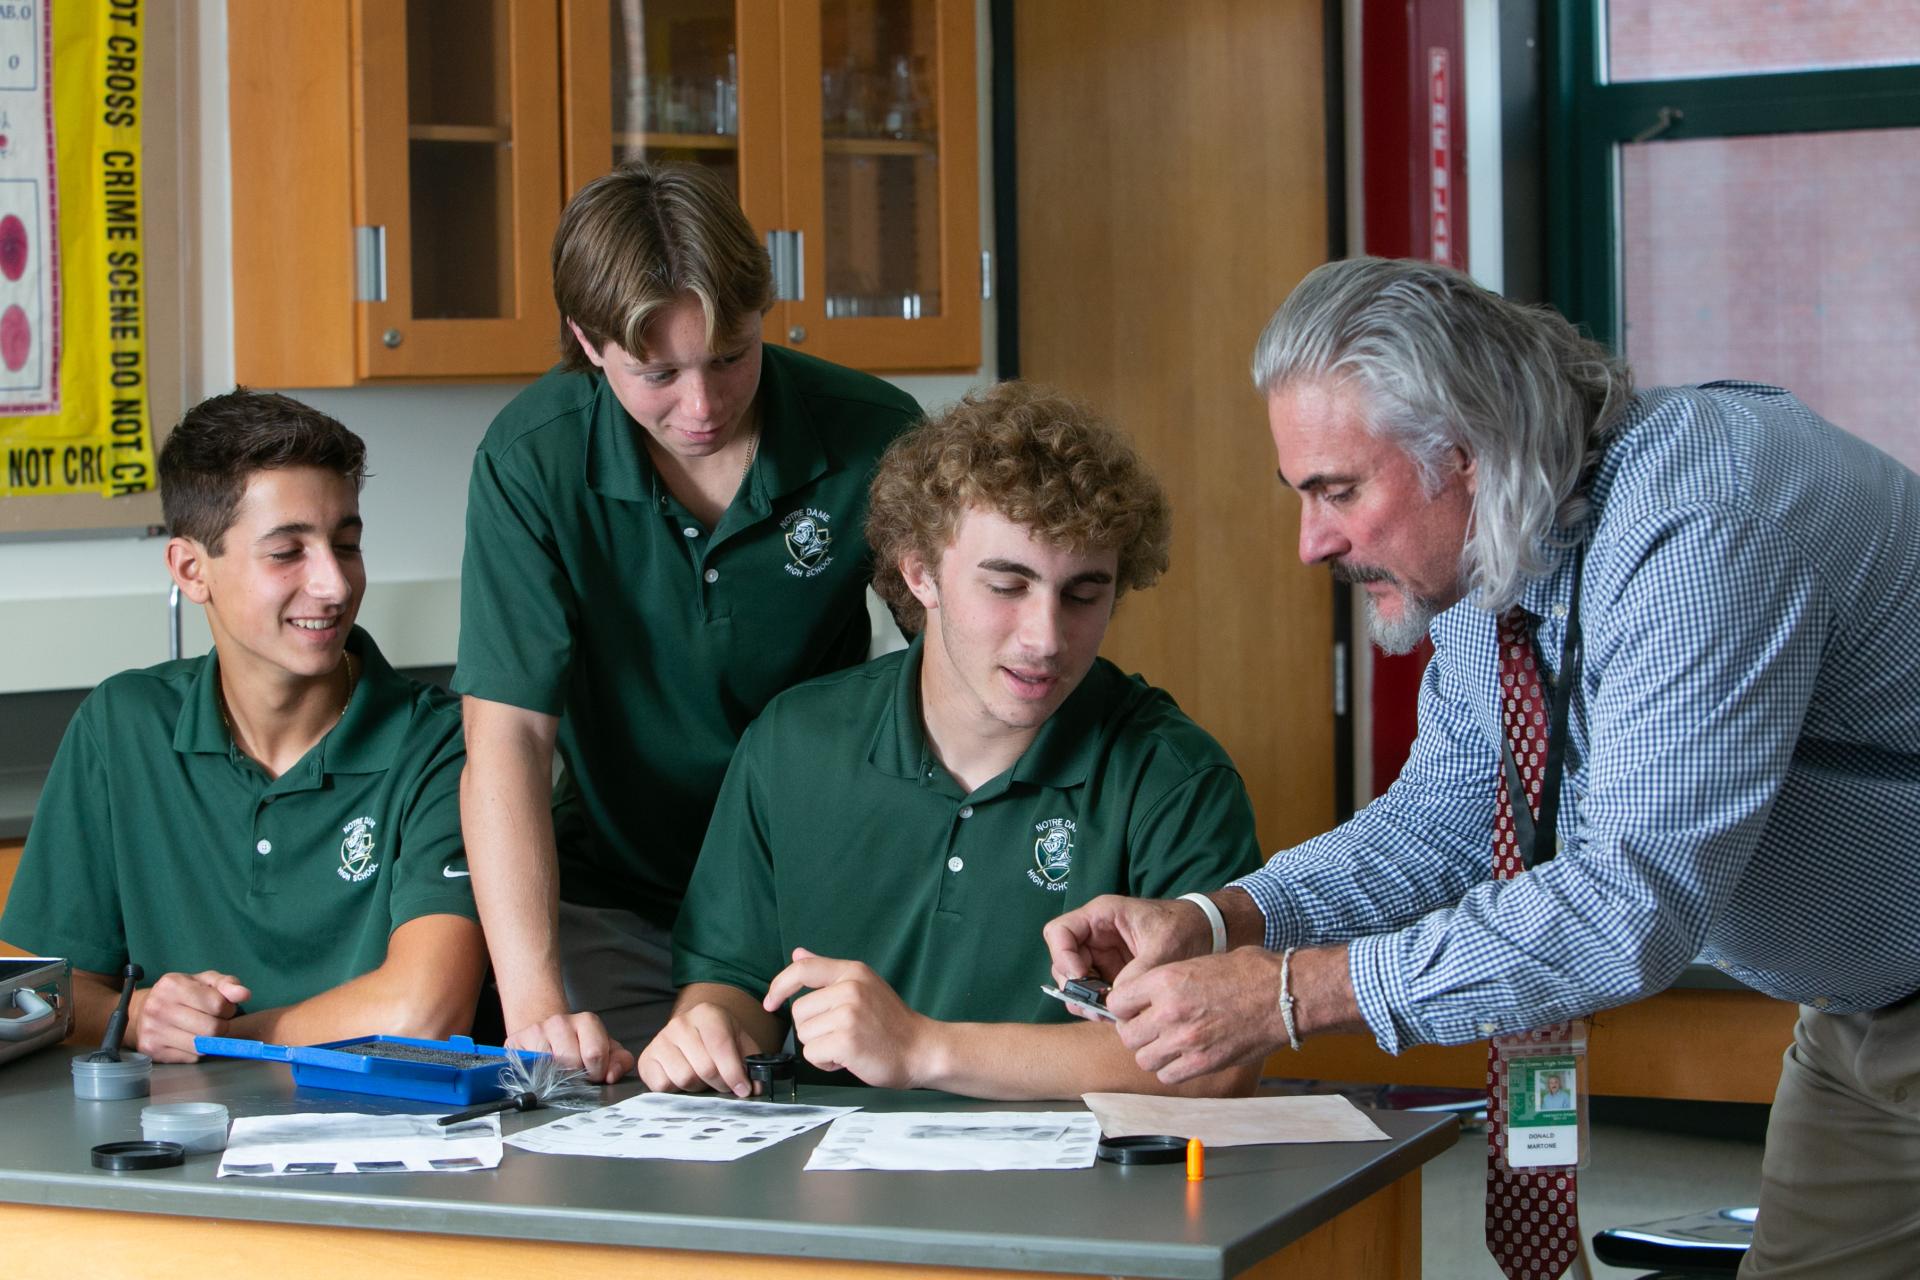 At Notre dame Academics Means Innovation  Notre Dame challenges students to become flexible and independent 21st century learners through rigorous study, innovative teaching practices, and personalized exploration. Our academics prepare students for life beyond high school.  Learn more 